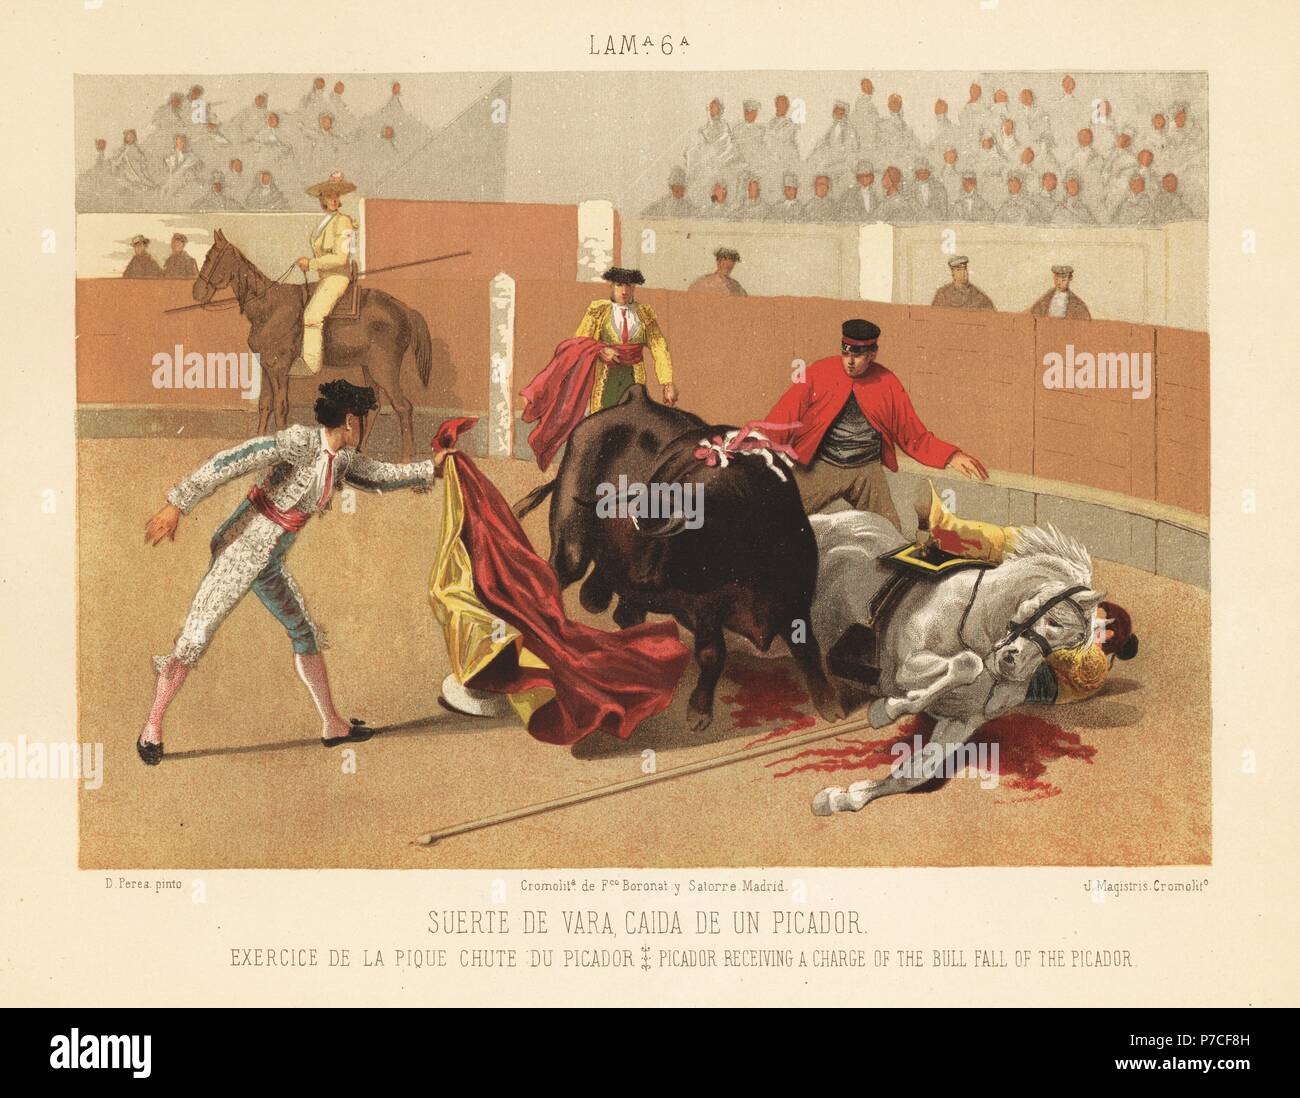 Matador with cloak distracting a bull after it has charged and injured a picador and his horse in the bullring. Chromolithograph by J. Magistris after an illustration by Daniel Perea from Bullfight, Corrida del Toros, Madrid, Boronat & Satorre, 1894. Stock Photo